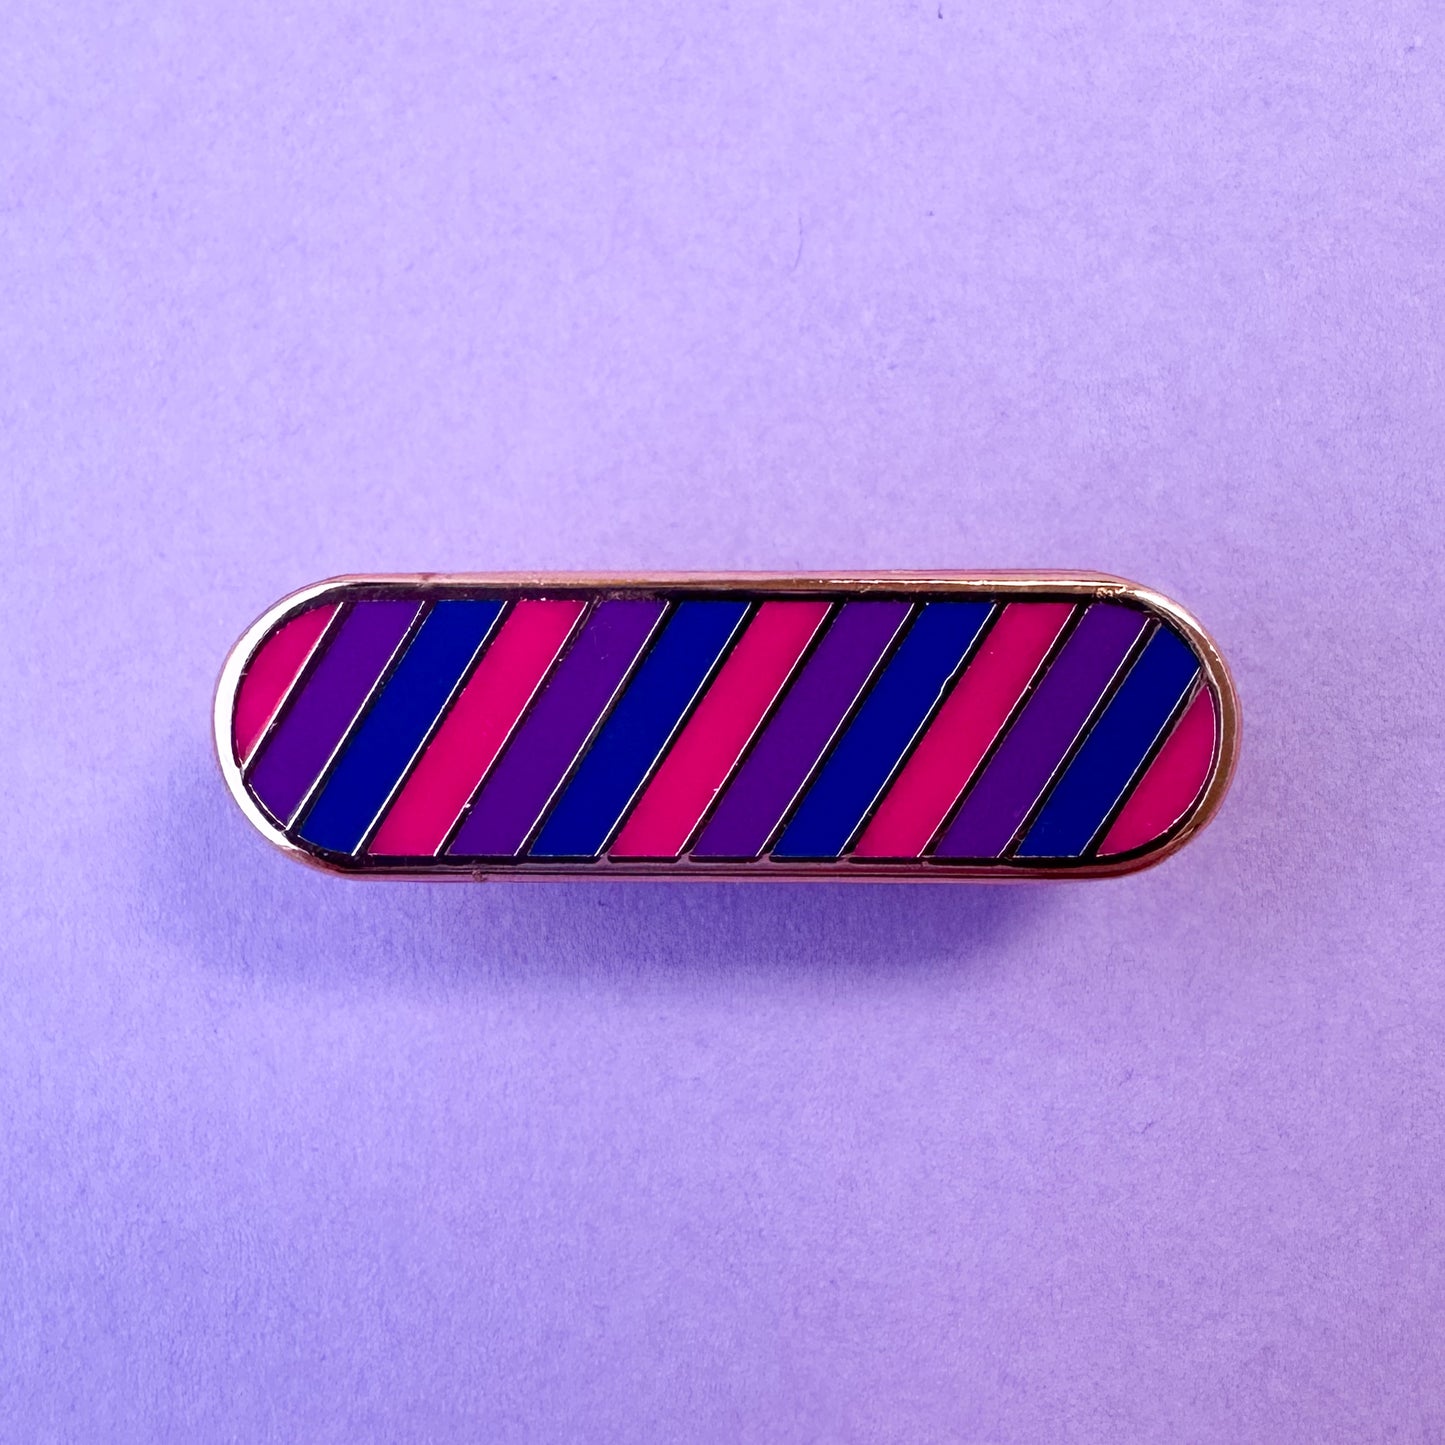 A bandaid shaped enamel pin with diagonal stripes in pink, purple, and blue which are the colors of the Bi Pride Flag. The pin is on a lavender background.